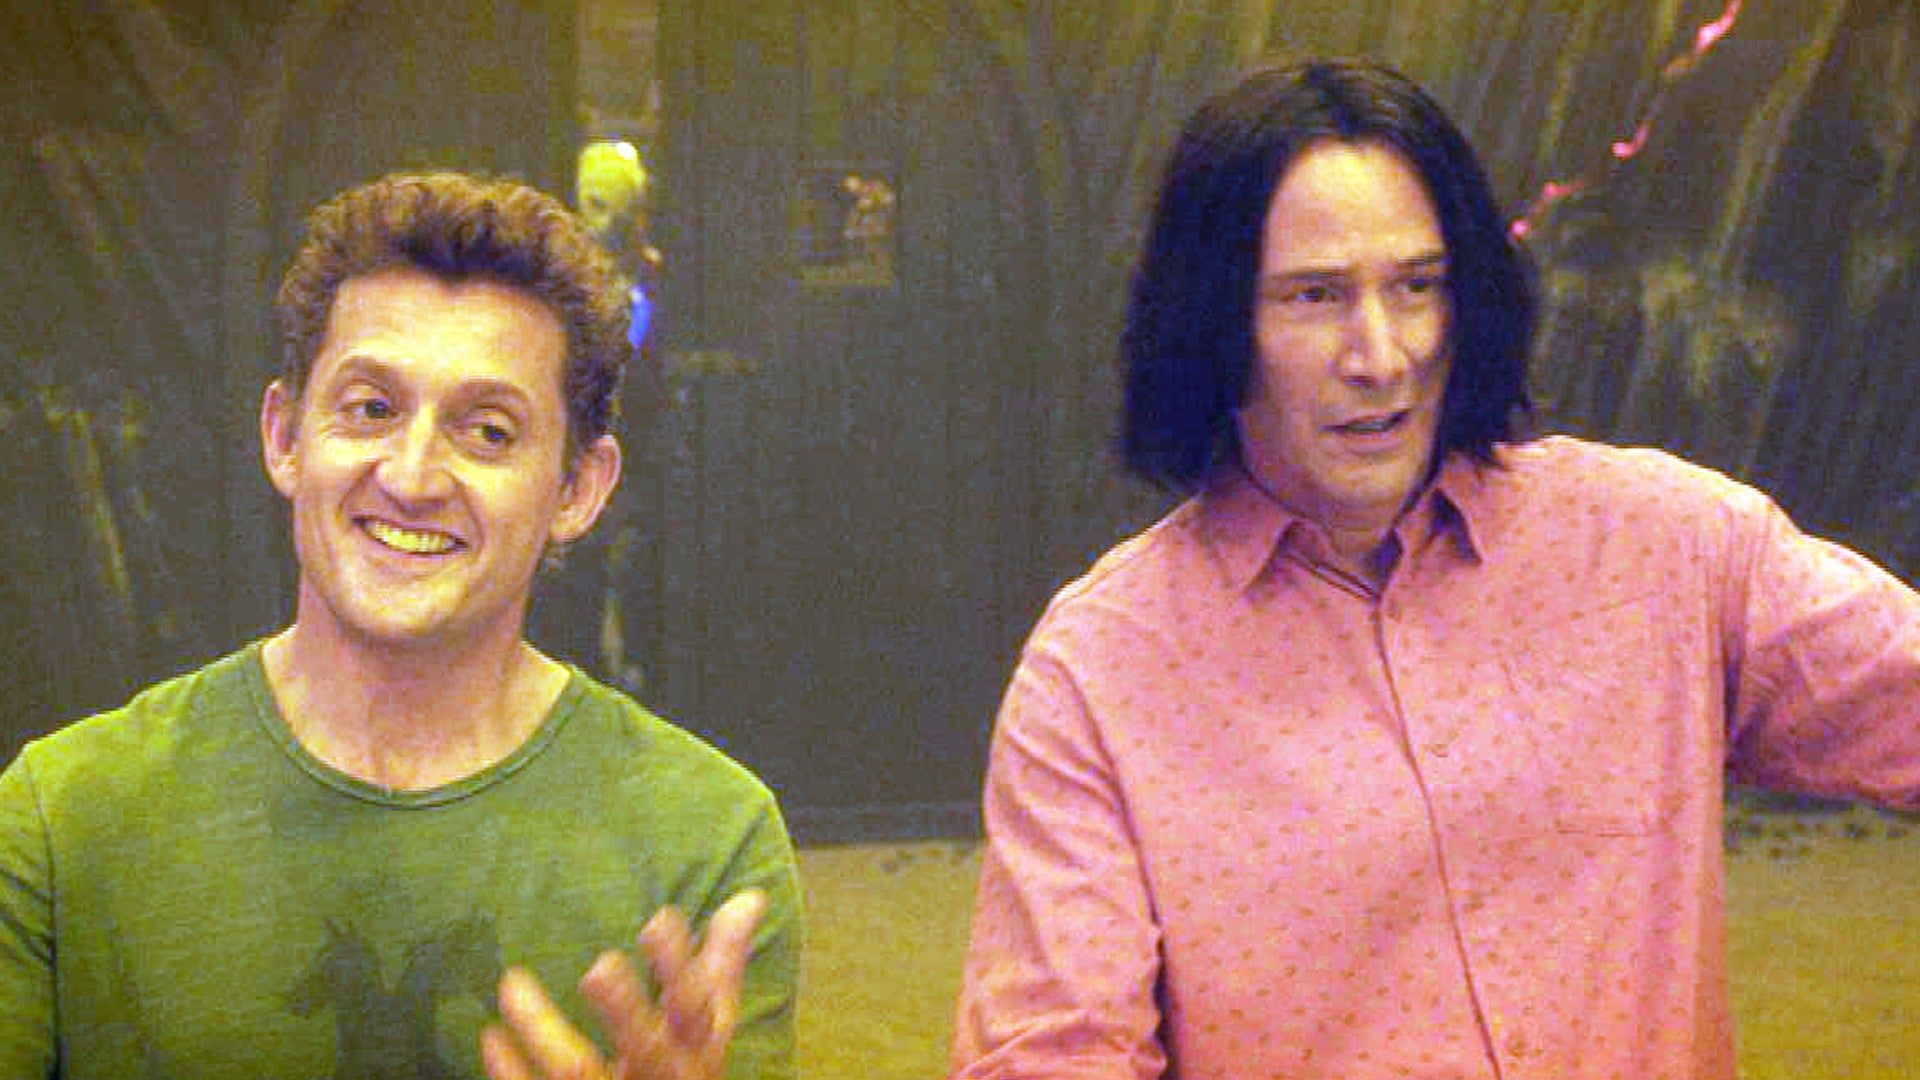 Bill & Ted Face the Music' Comic Con at Home Panel With Keanu Reeves, Alex Winter